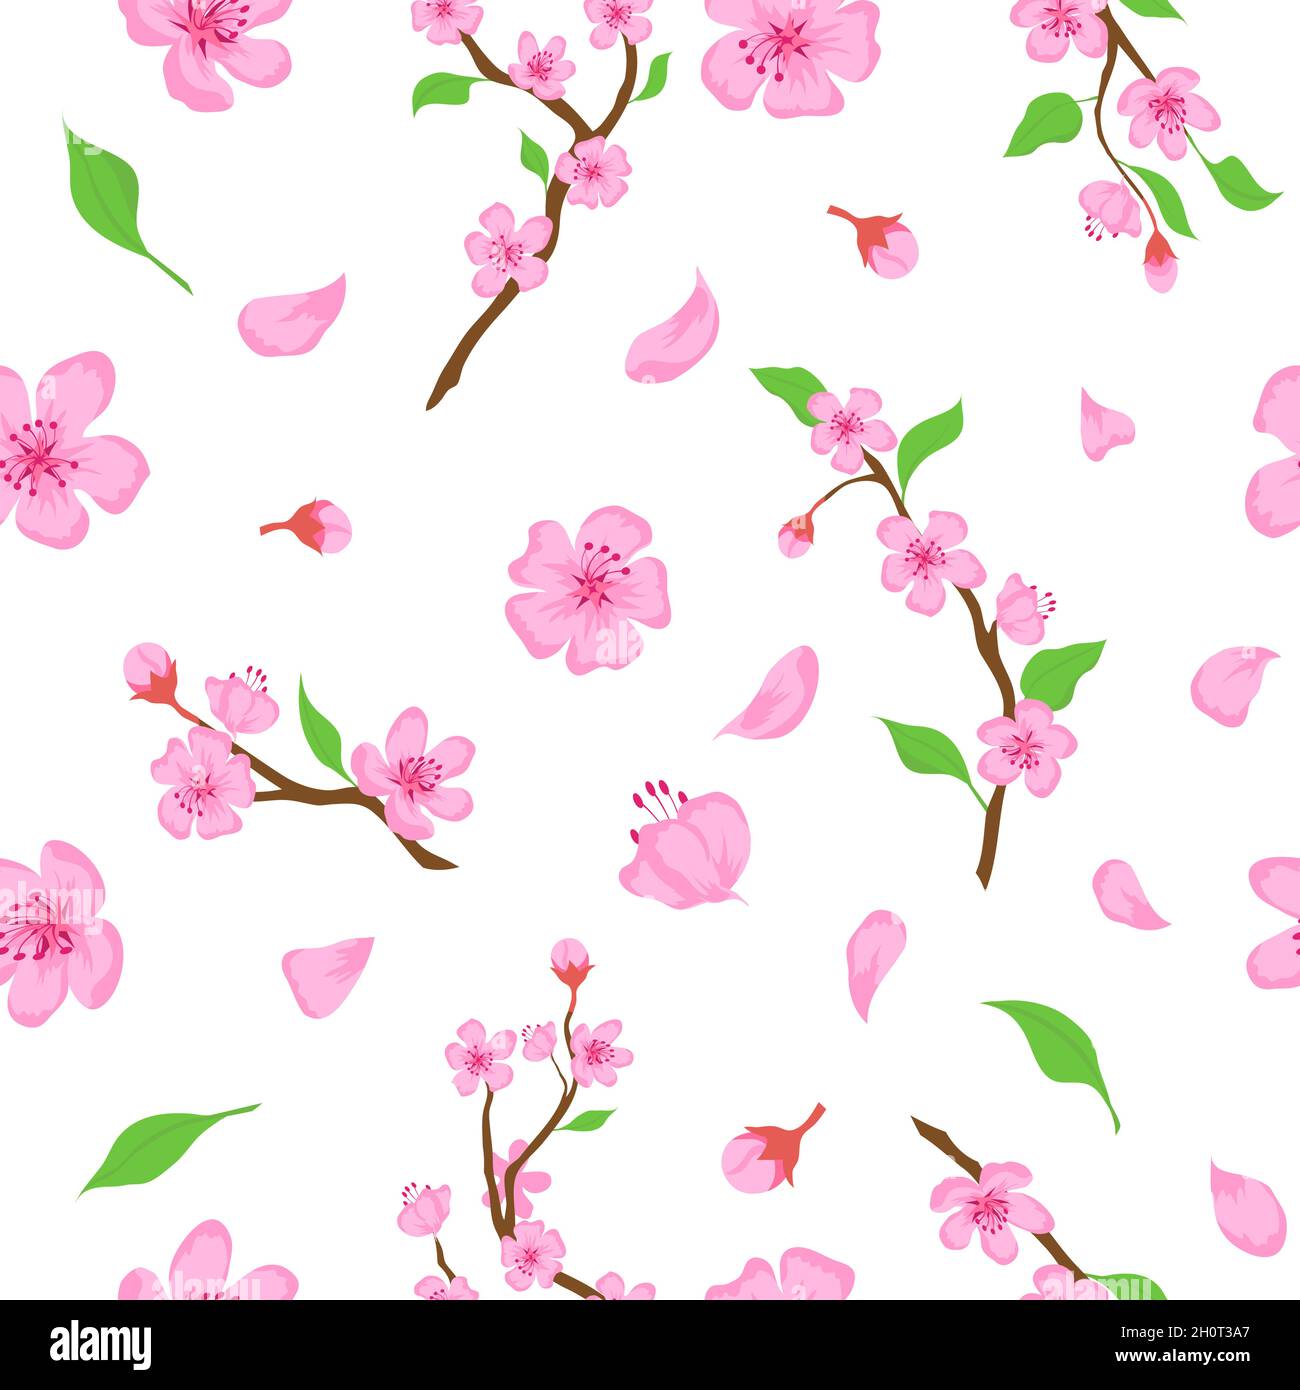 Pink sakura blossom flowers, petals and branches seamless pattern. Japanese spring cherry blooming print. Romantic floral vector wallpaper Stock Vector